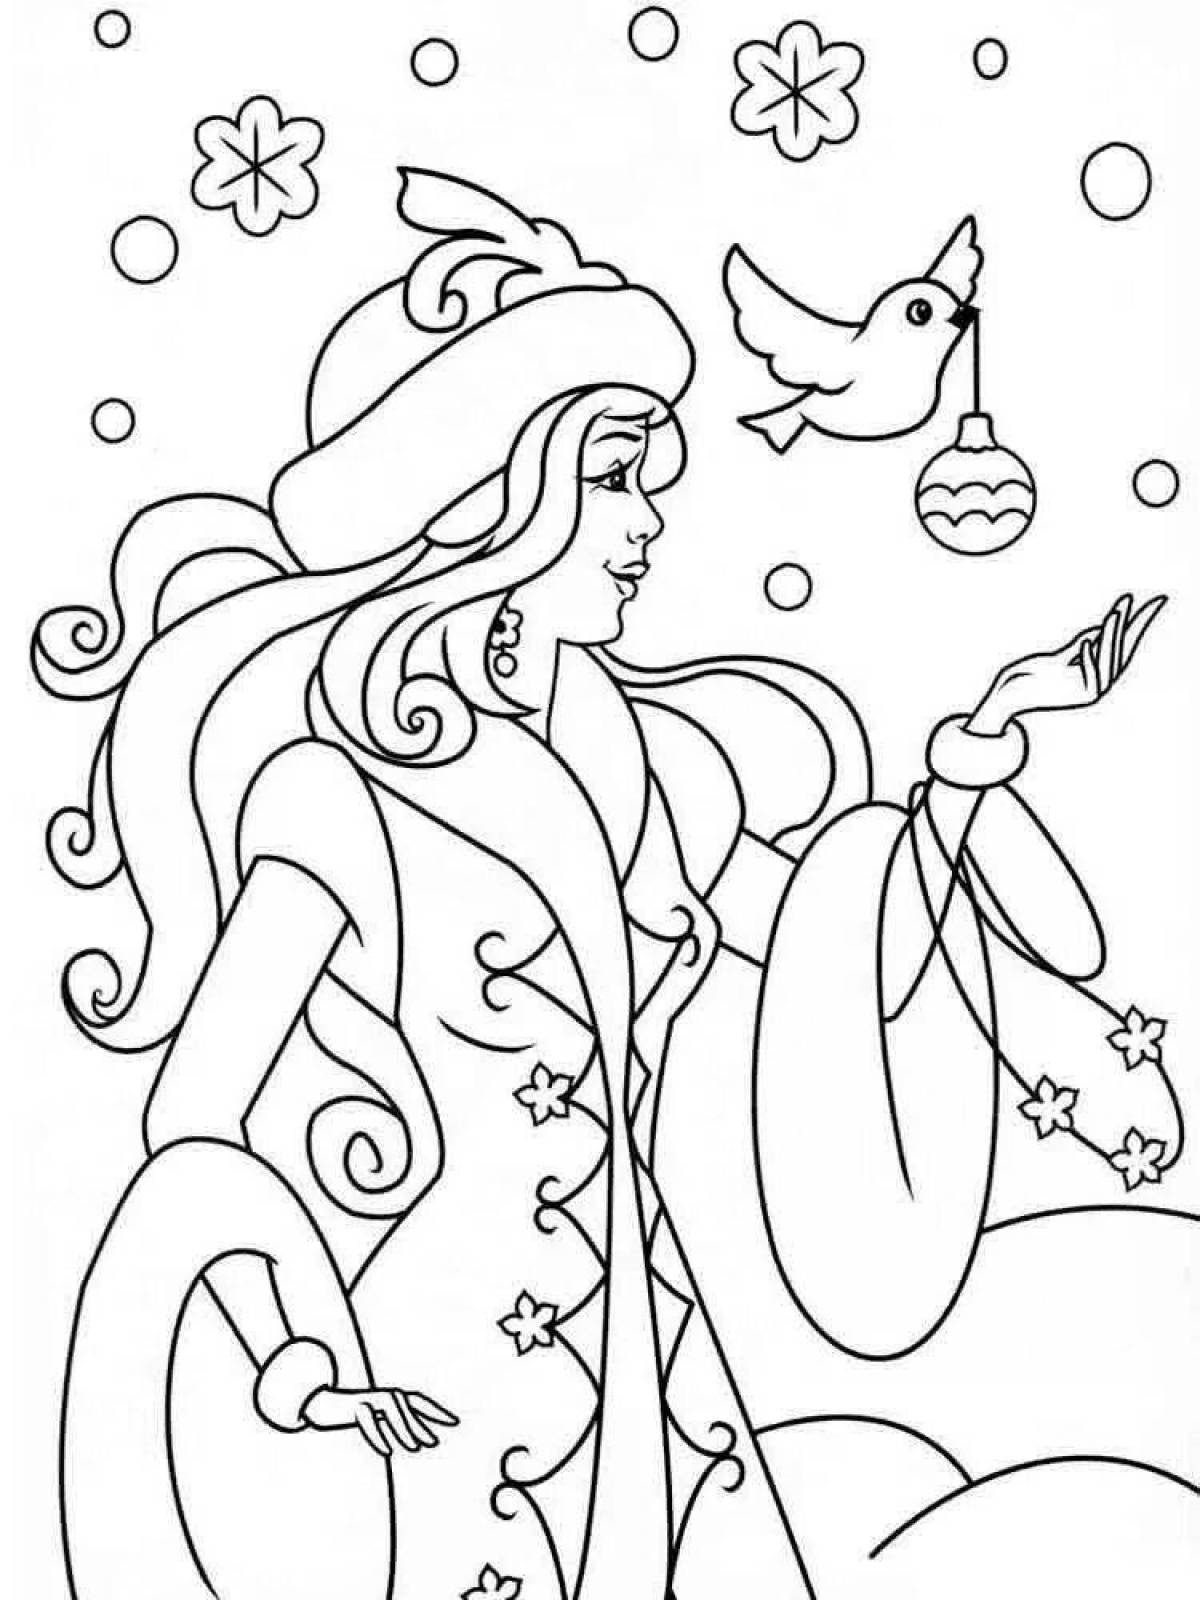 Funny coloring drawing of a snow maiden